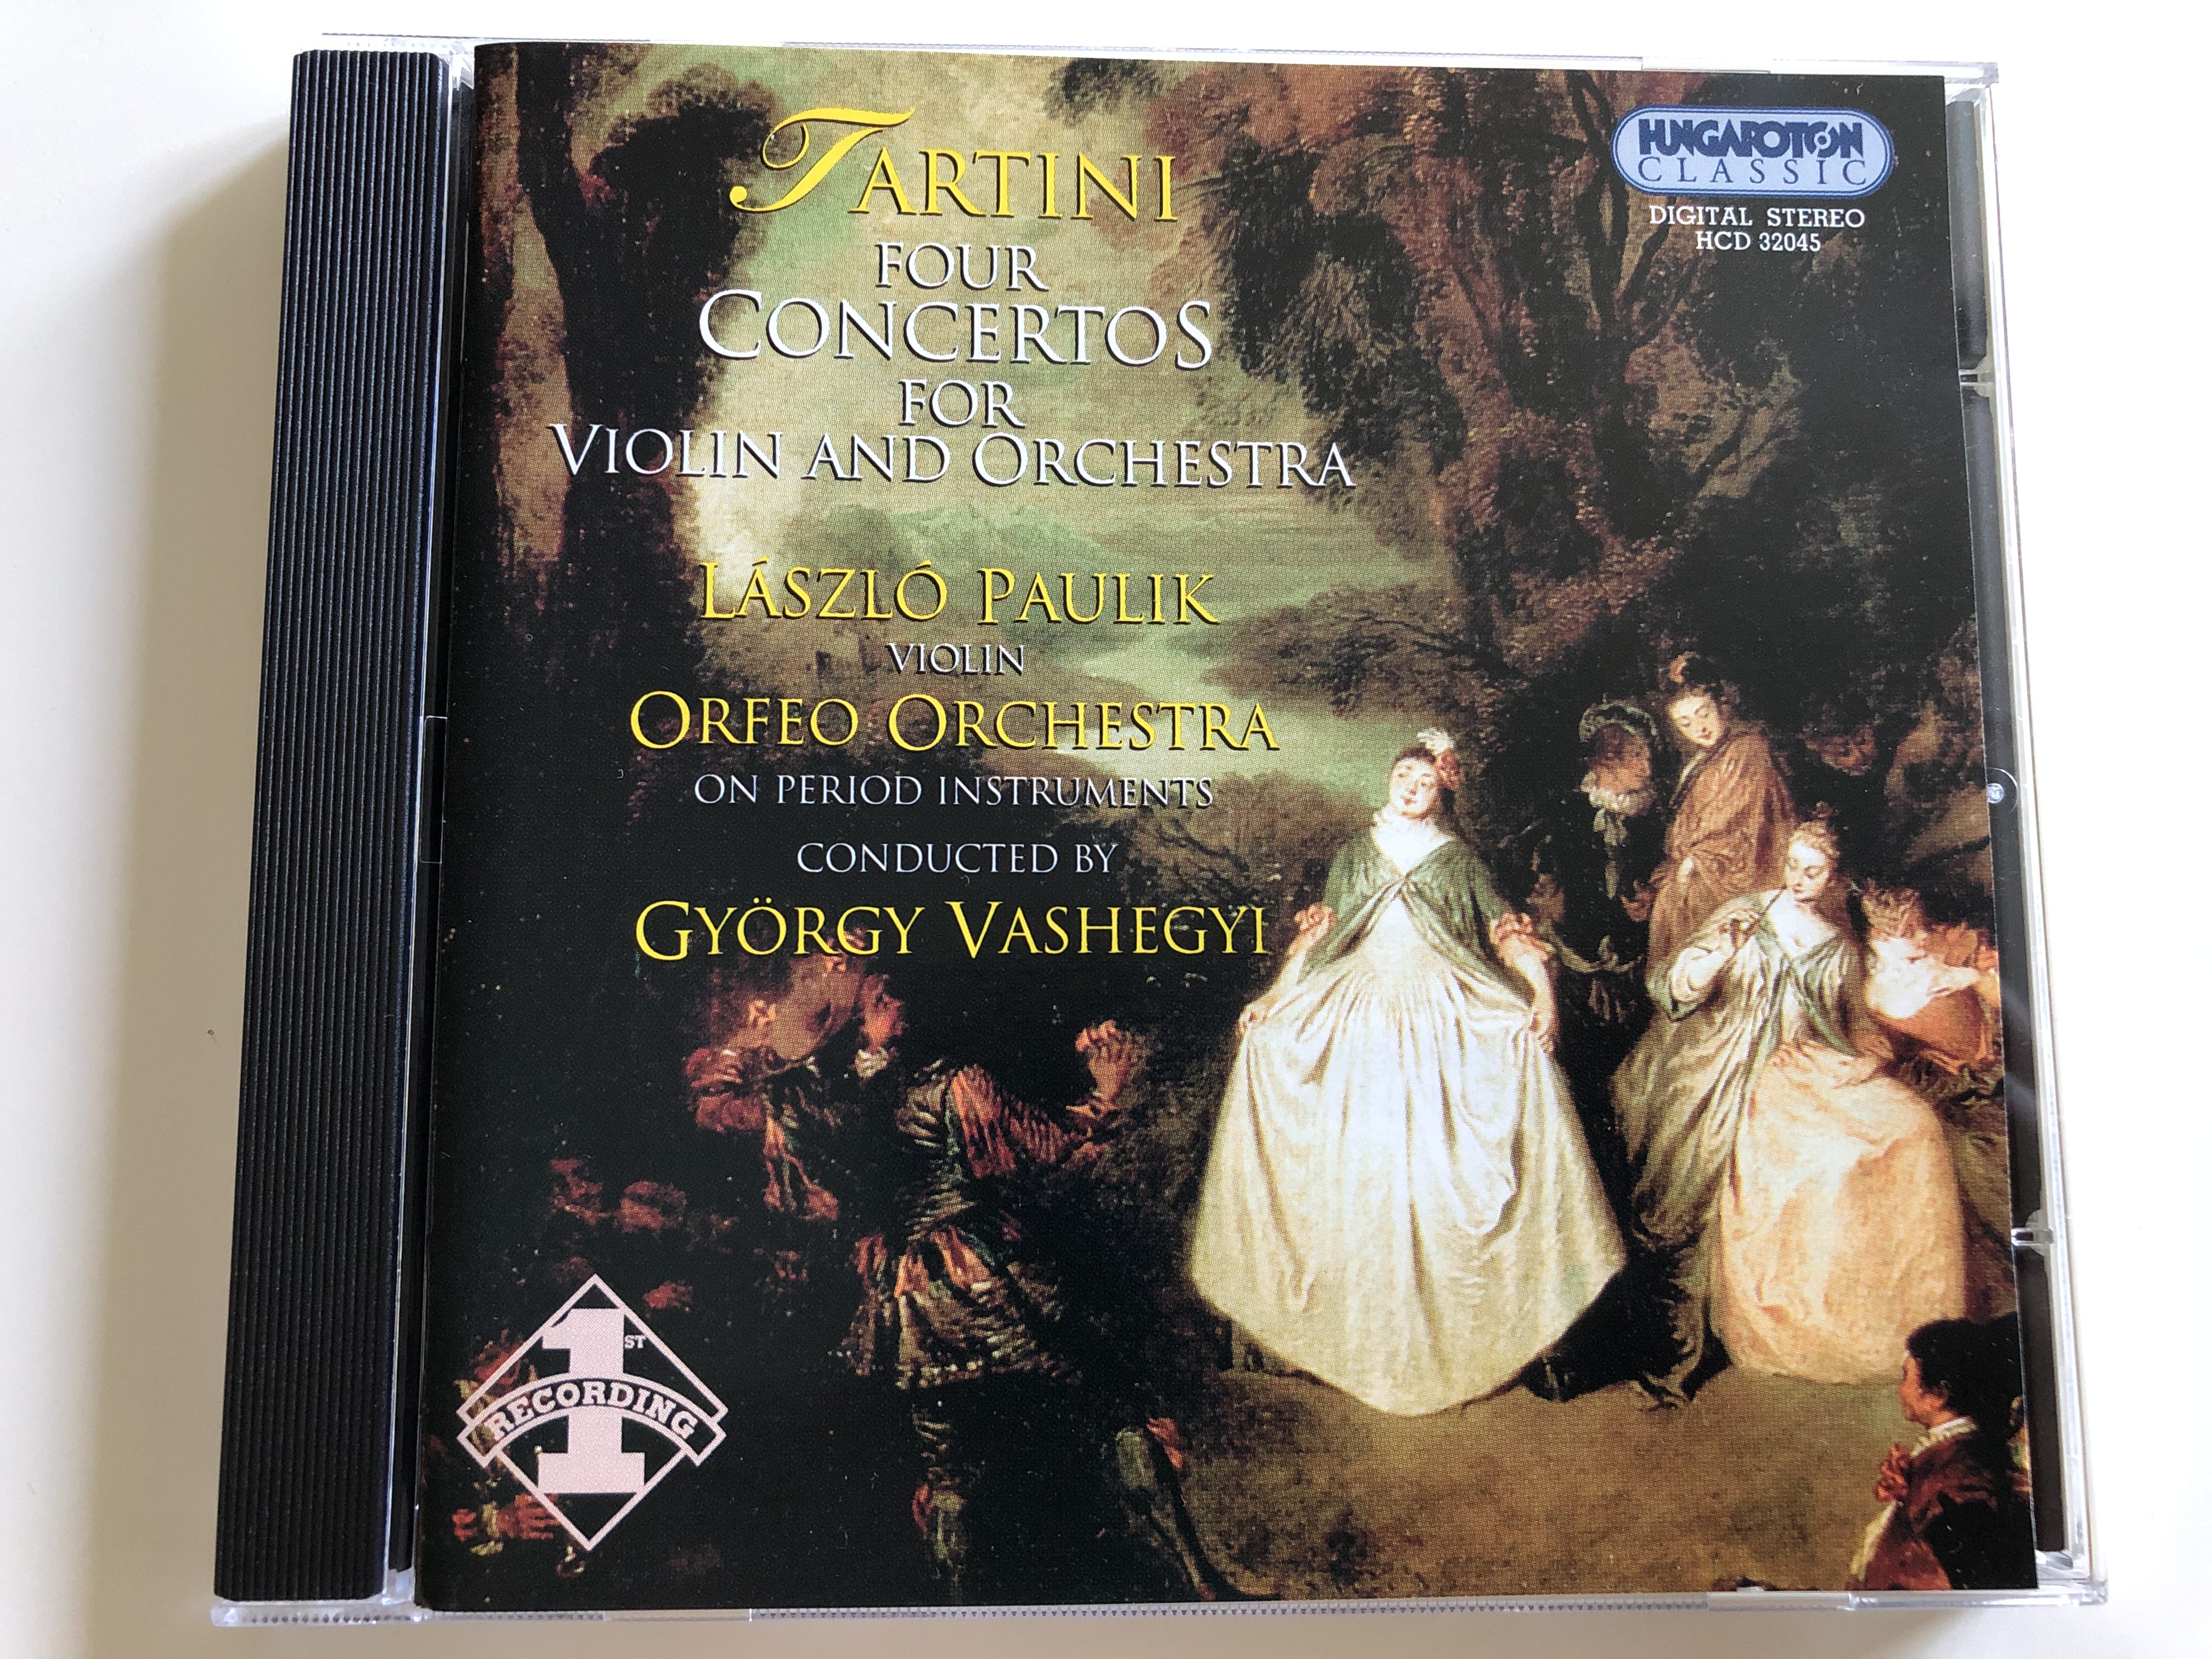 tartini-four-concertos-for-violin-and-orchestra-l-szl-paulik-violin-orfeo-orchestra-on-period-instruments-conducted-by-gy-rgy-vashegyi-hungaroton-classic-audio-cd-2002-hdc-32045-1-.jpg